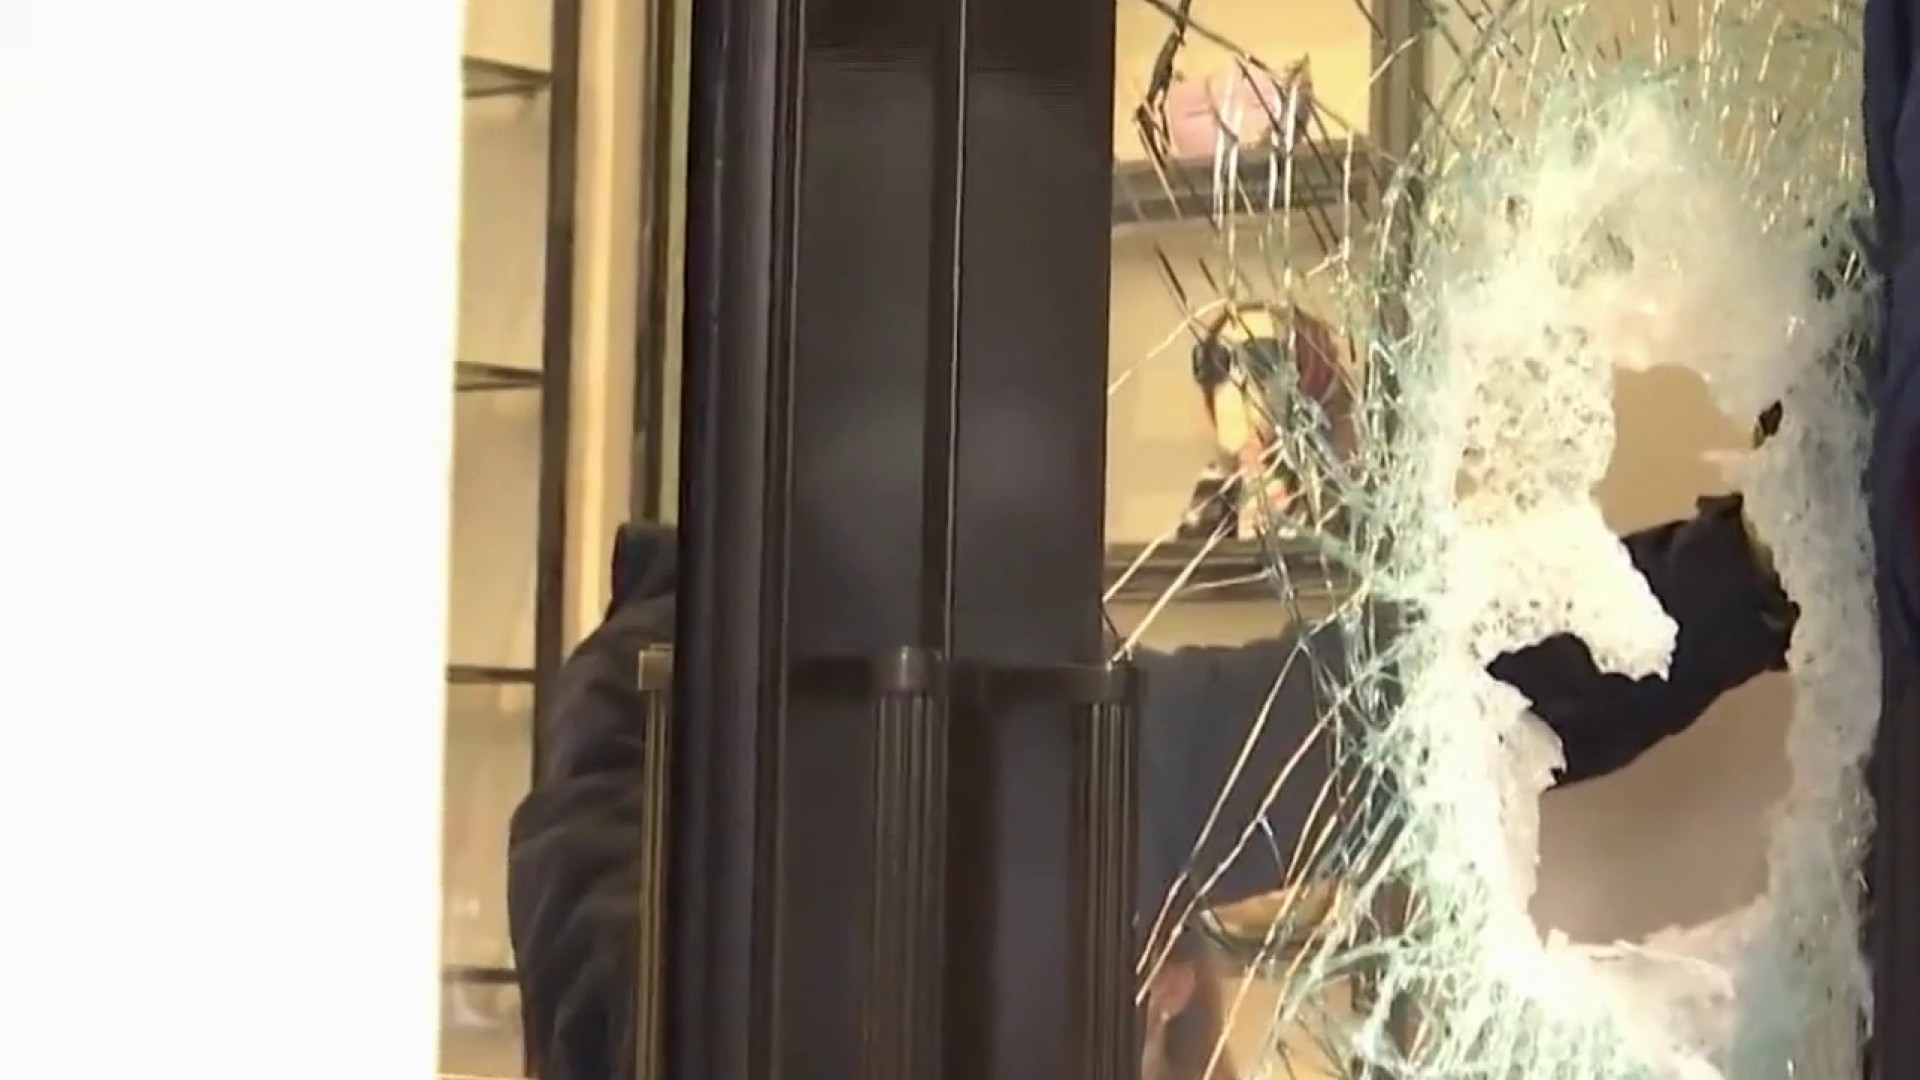 9 suspects charged in San Fransisco smashandgrab robberies